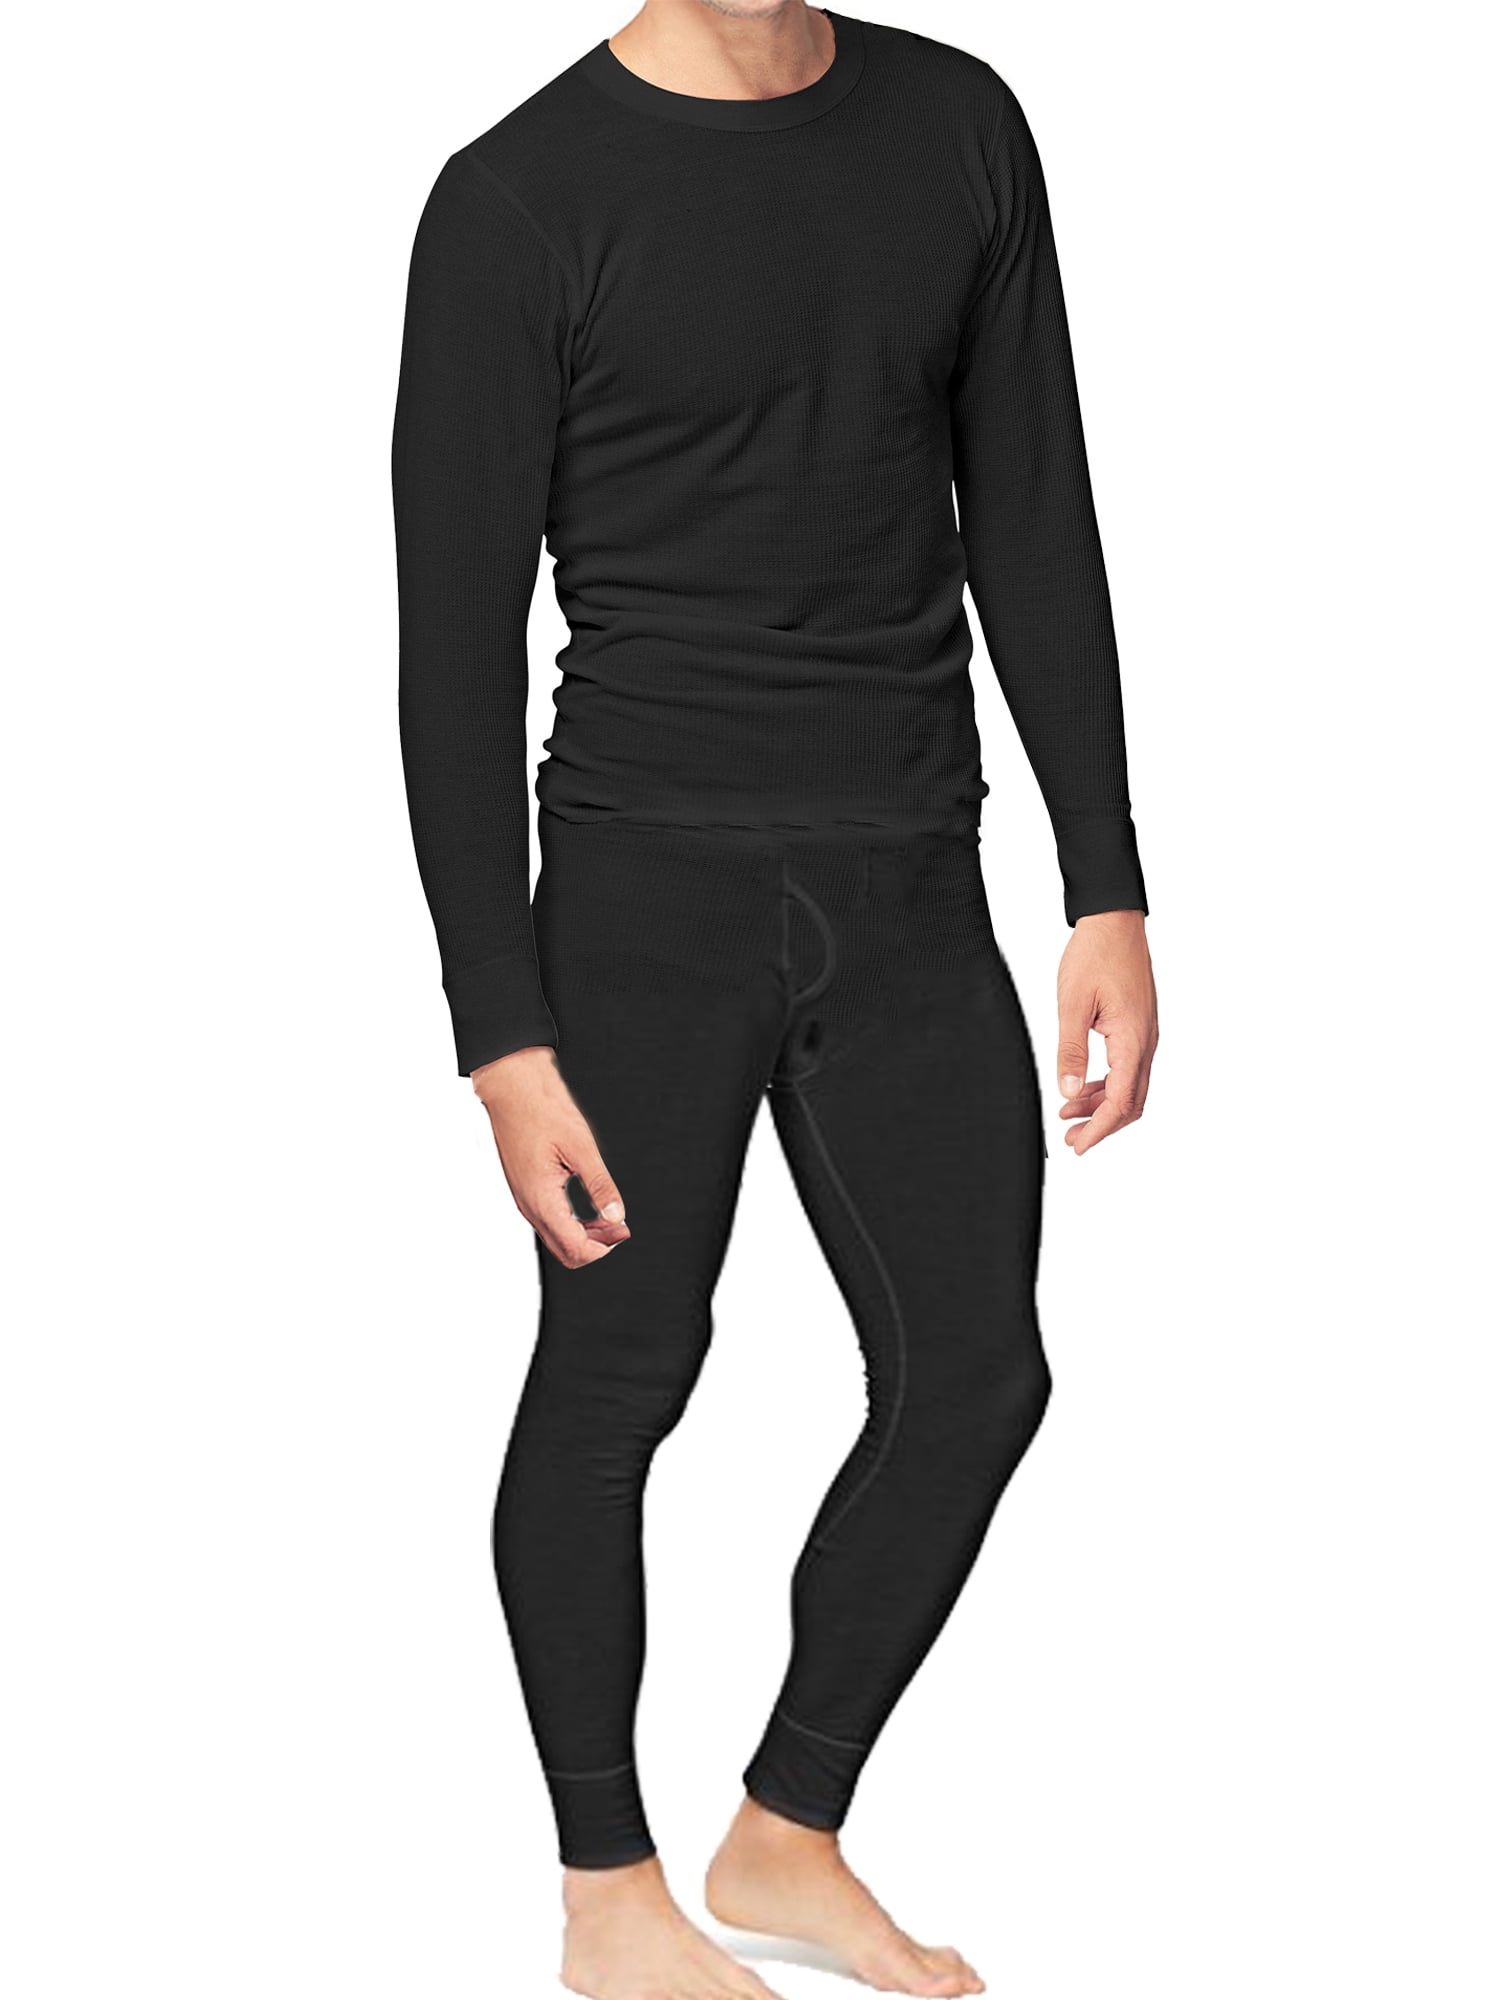 Place and Street Mens 2pc Thermal Underwear Set Cotton Long Johns ...